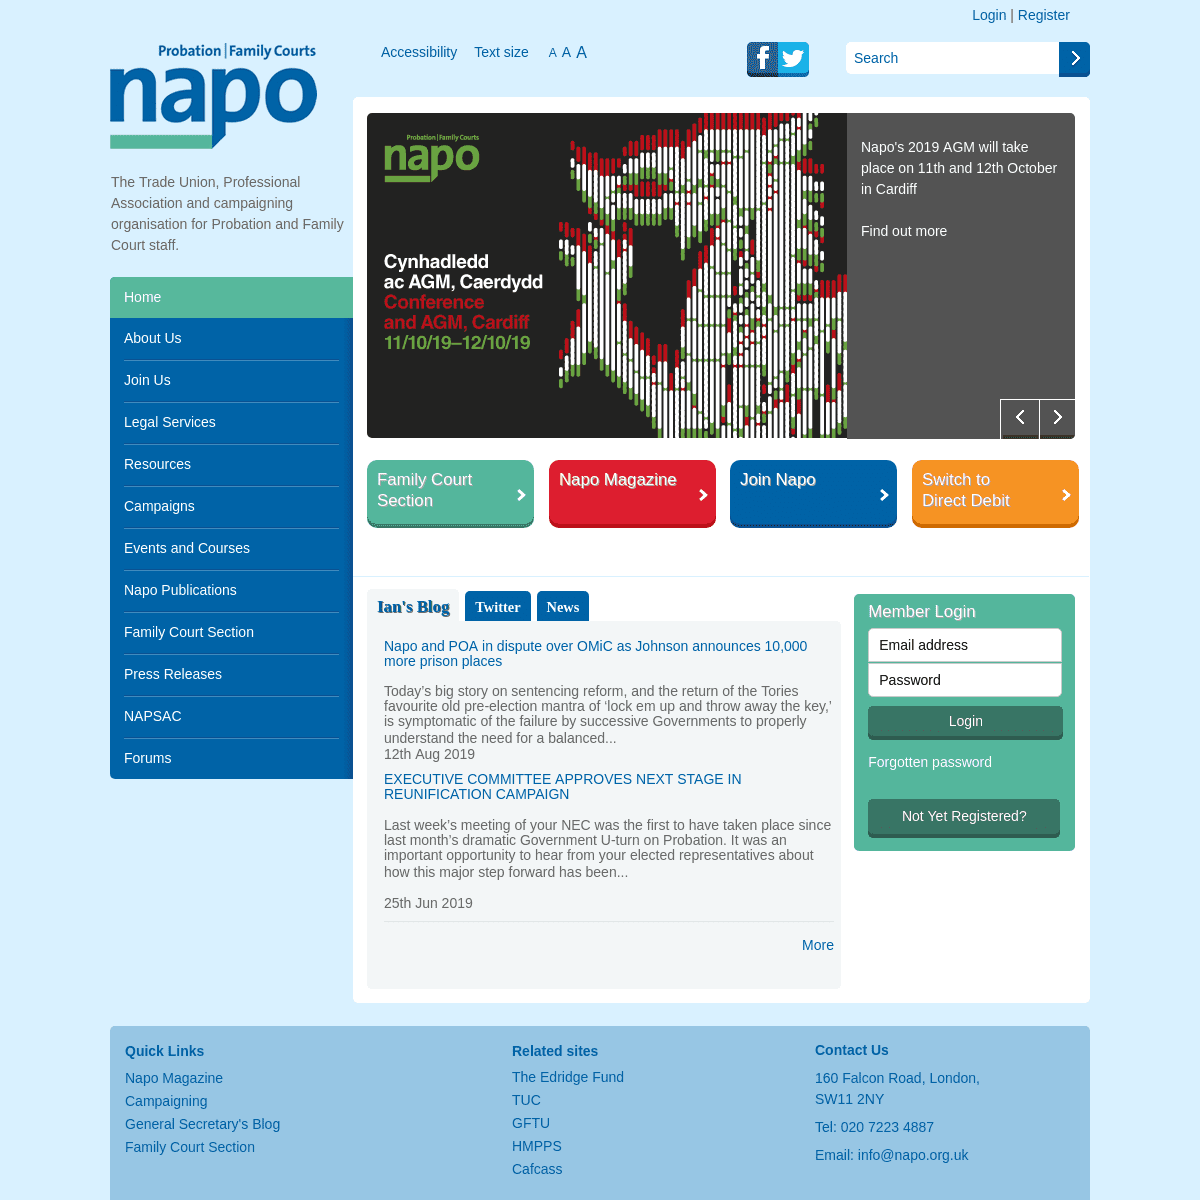 A complete backup of napo.org.uk